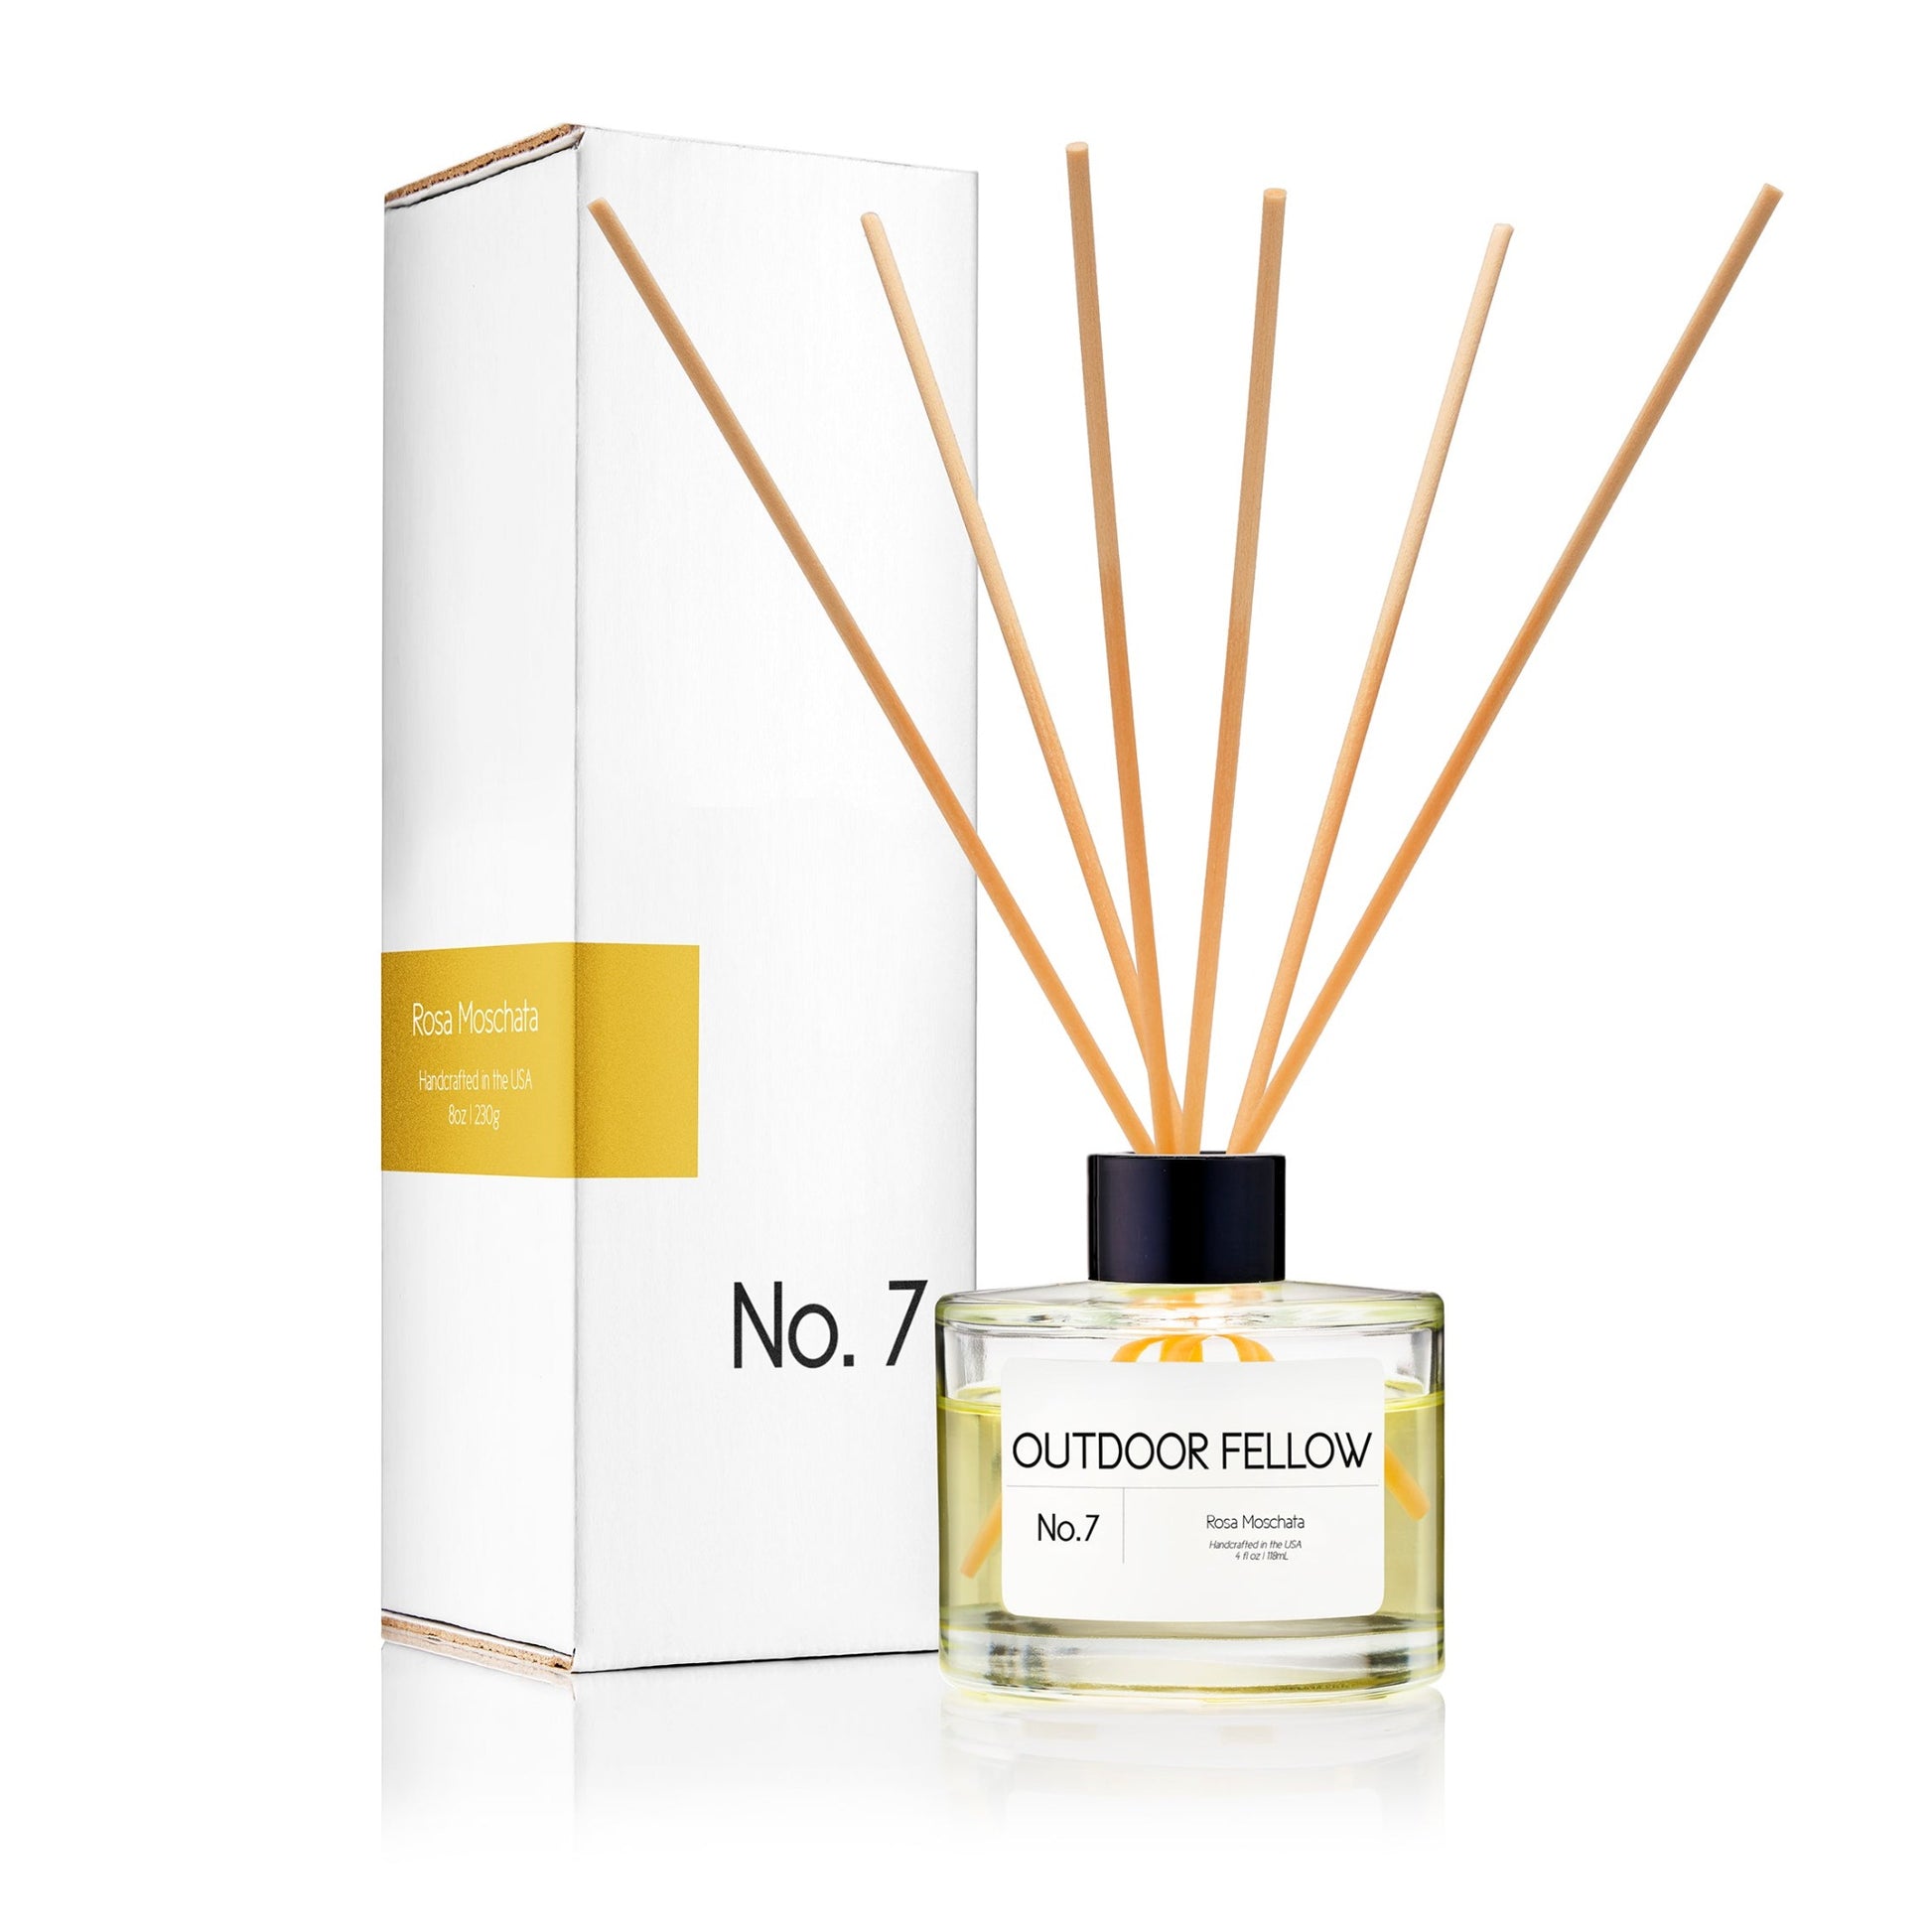 No.7 Rosa Moschata reed diffuser with packaging